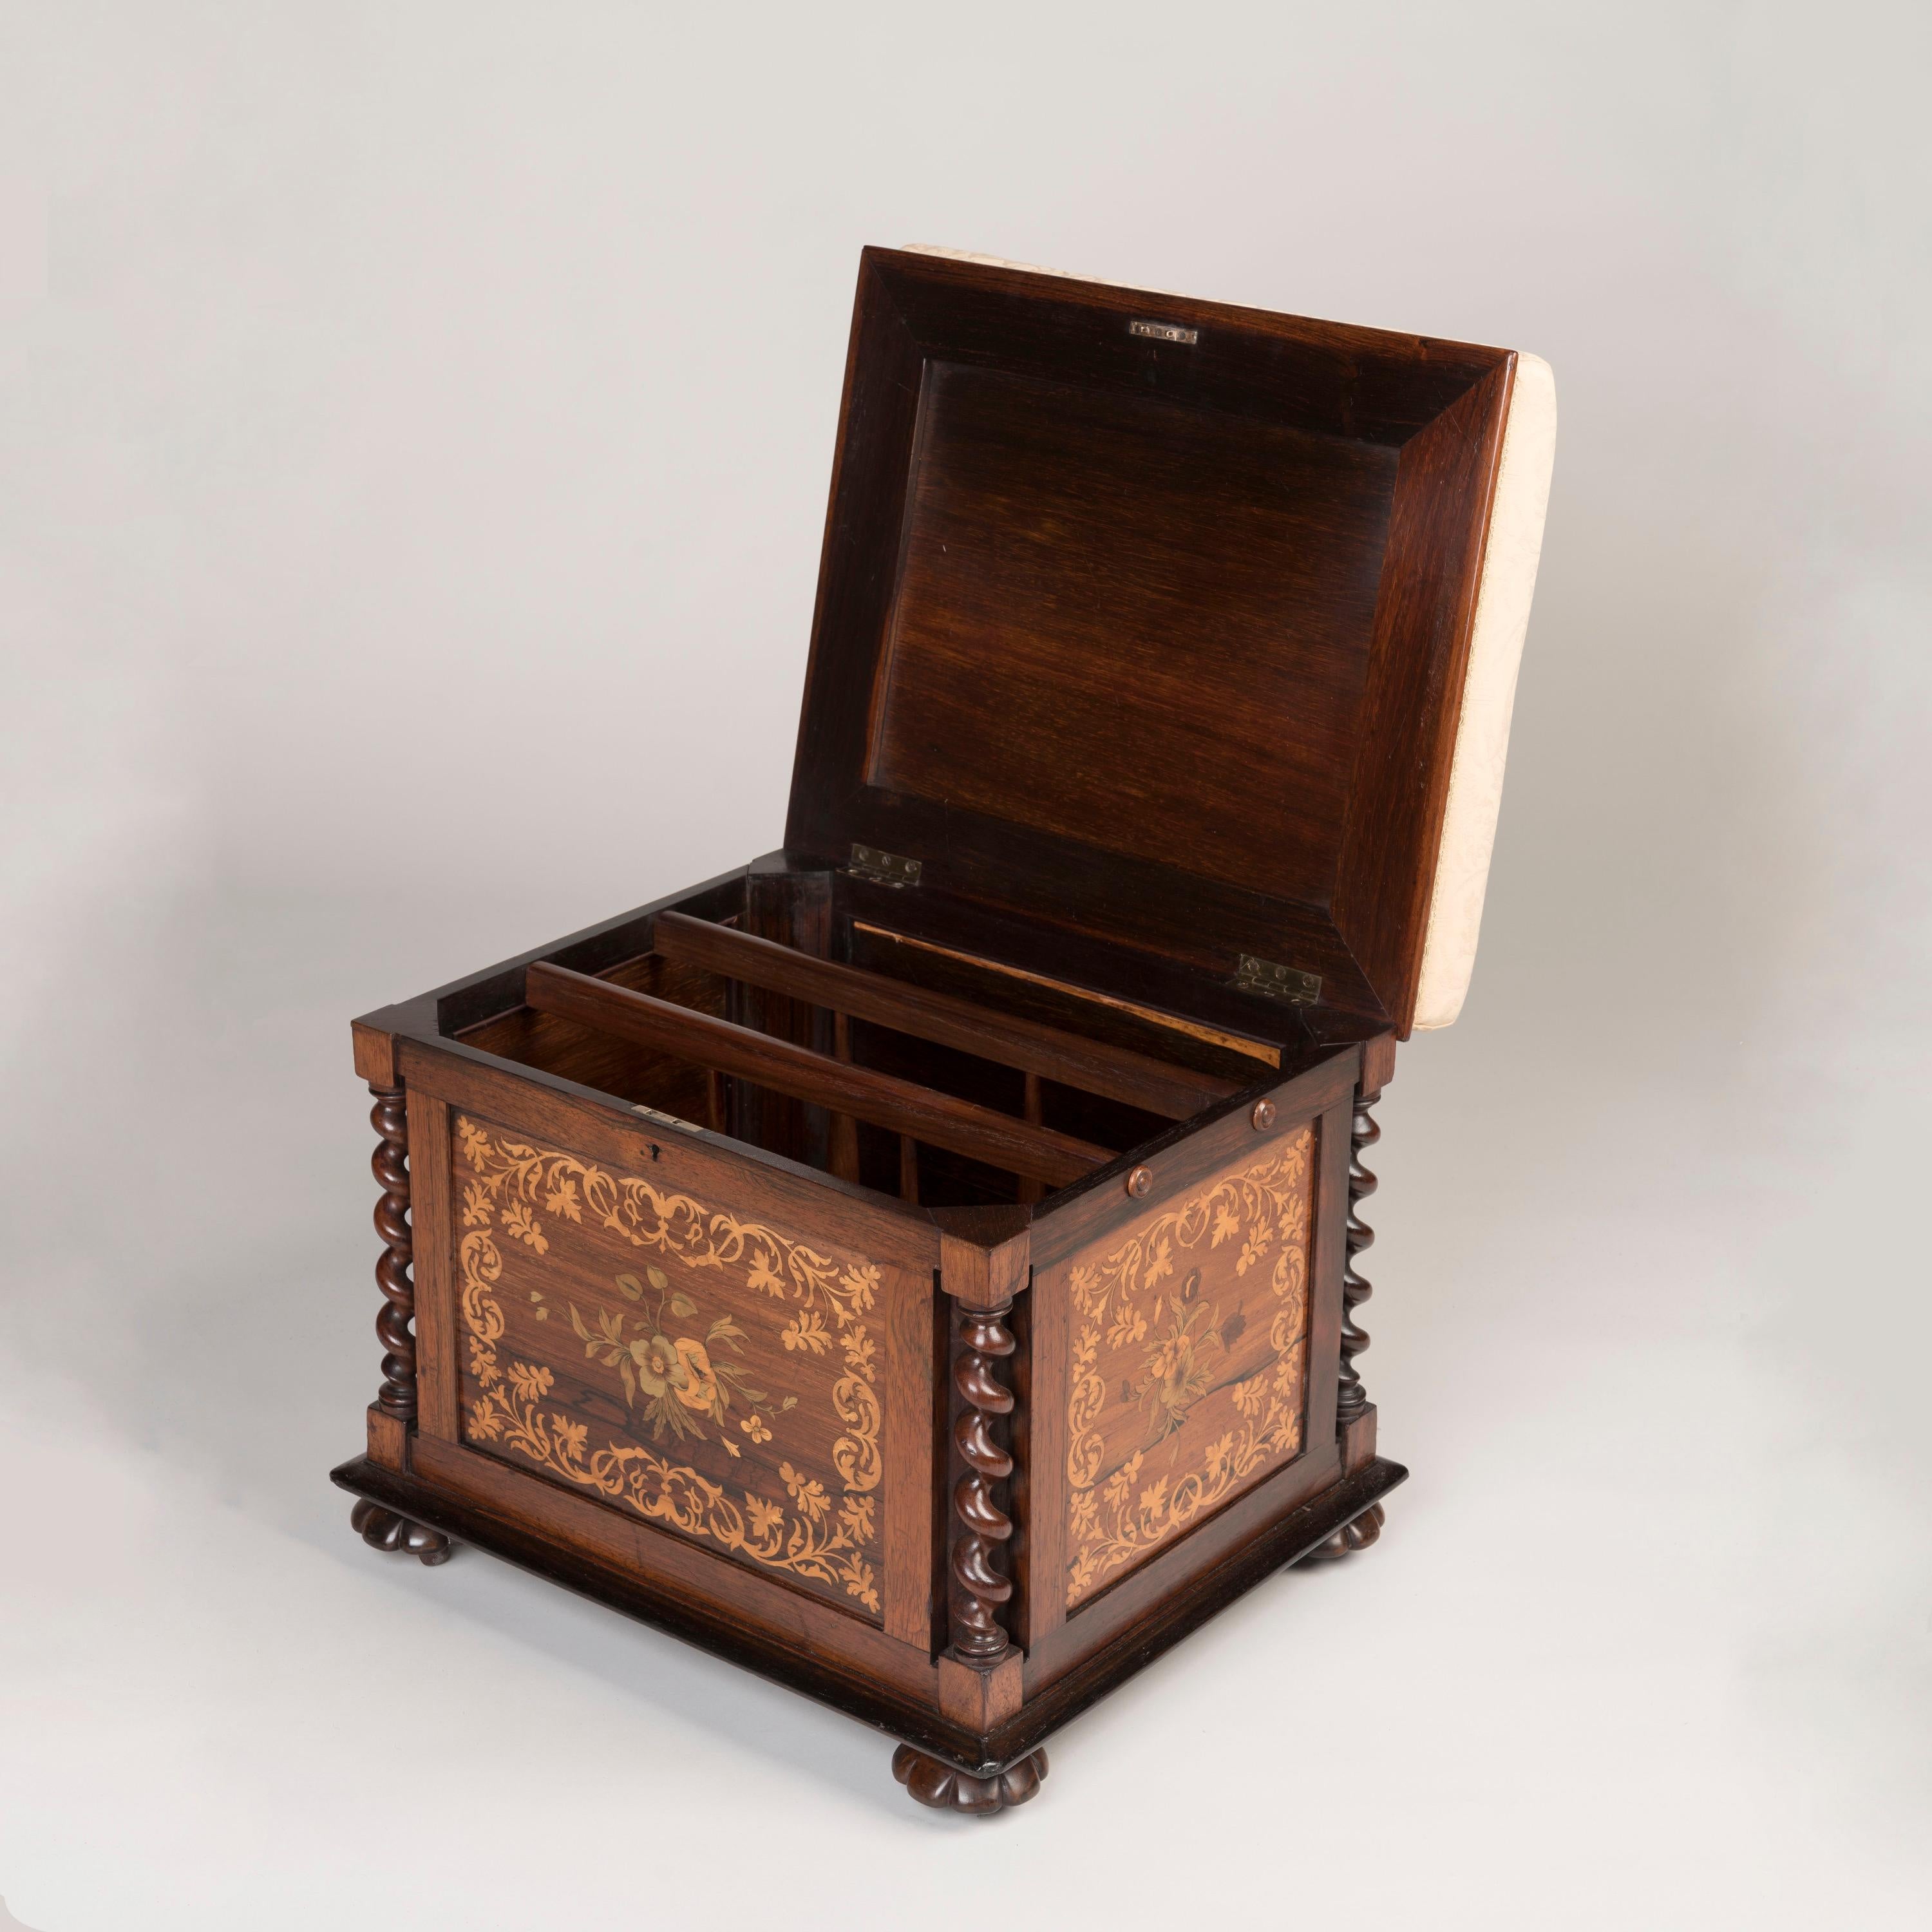 A Rosewood and Marquetry inlaid stool

A delightful and practical seat made of rosewood and incorporating marquetry inlays of boxwood and harewood, supported on hidden casters within lobed bun feet, the corner supports turned in a barley twist